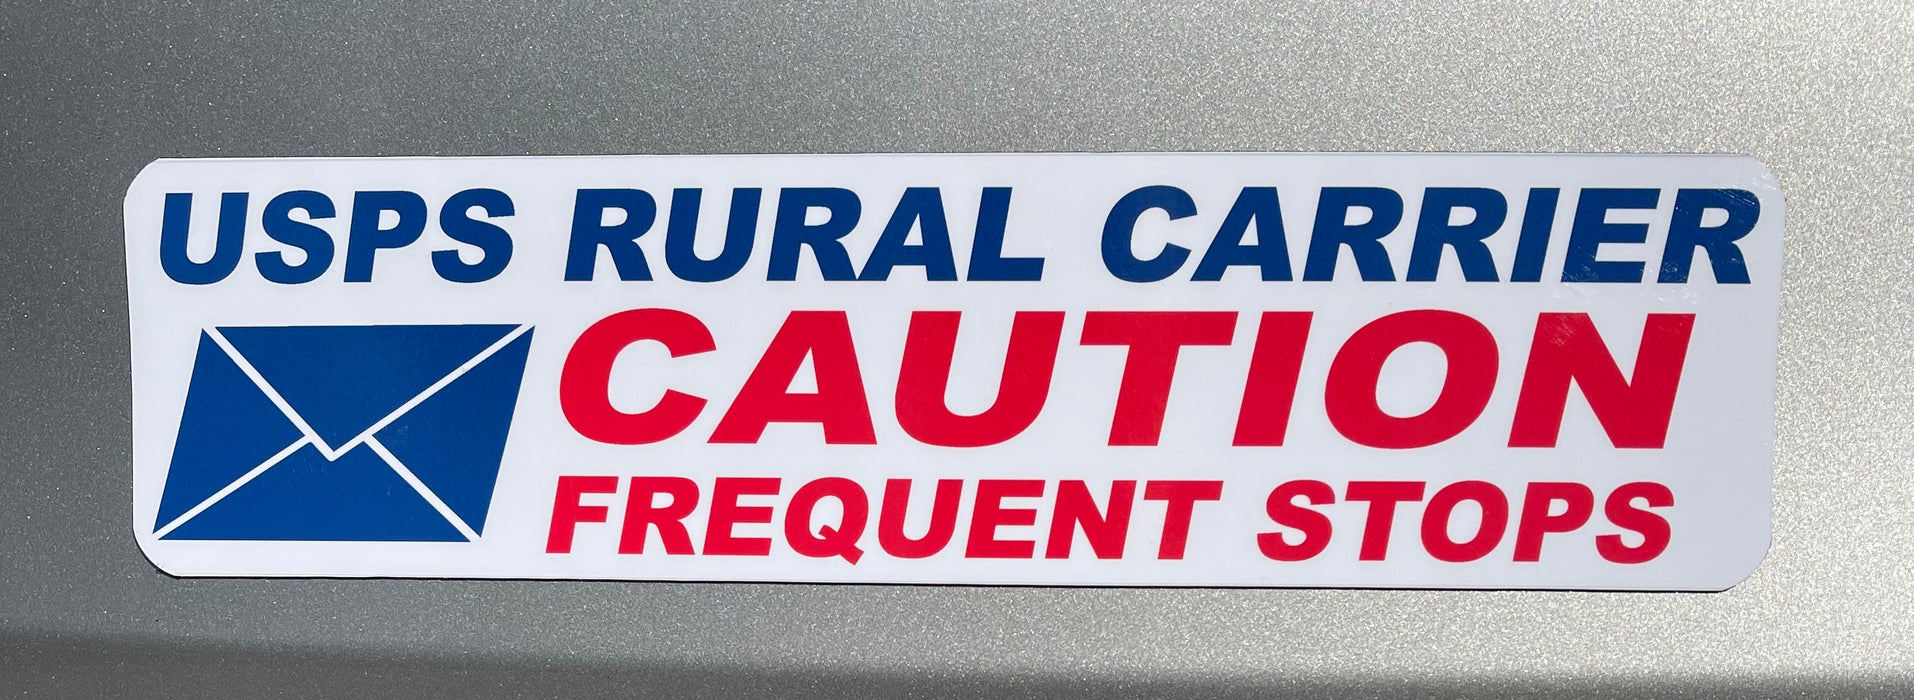 Rural Carrier Magnetic Signs Large 3 Pack Combo